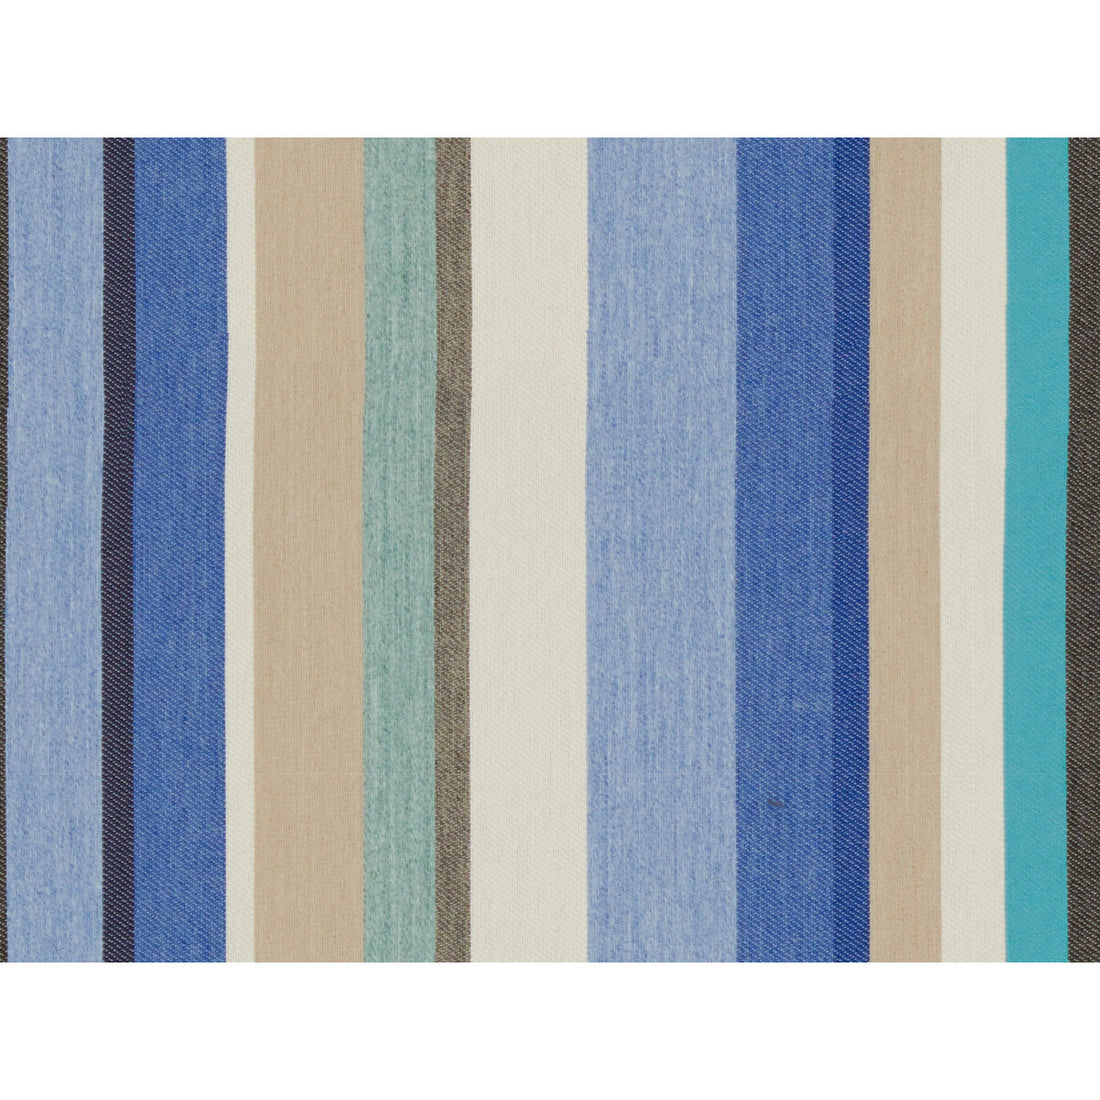 Sempione fabric in ocean color - pattern 34506.516.0 - by Kravet Design in the Echo Indoor Outdoor Ibiza collection